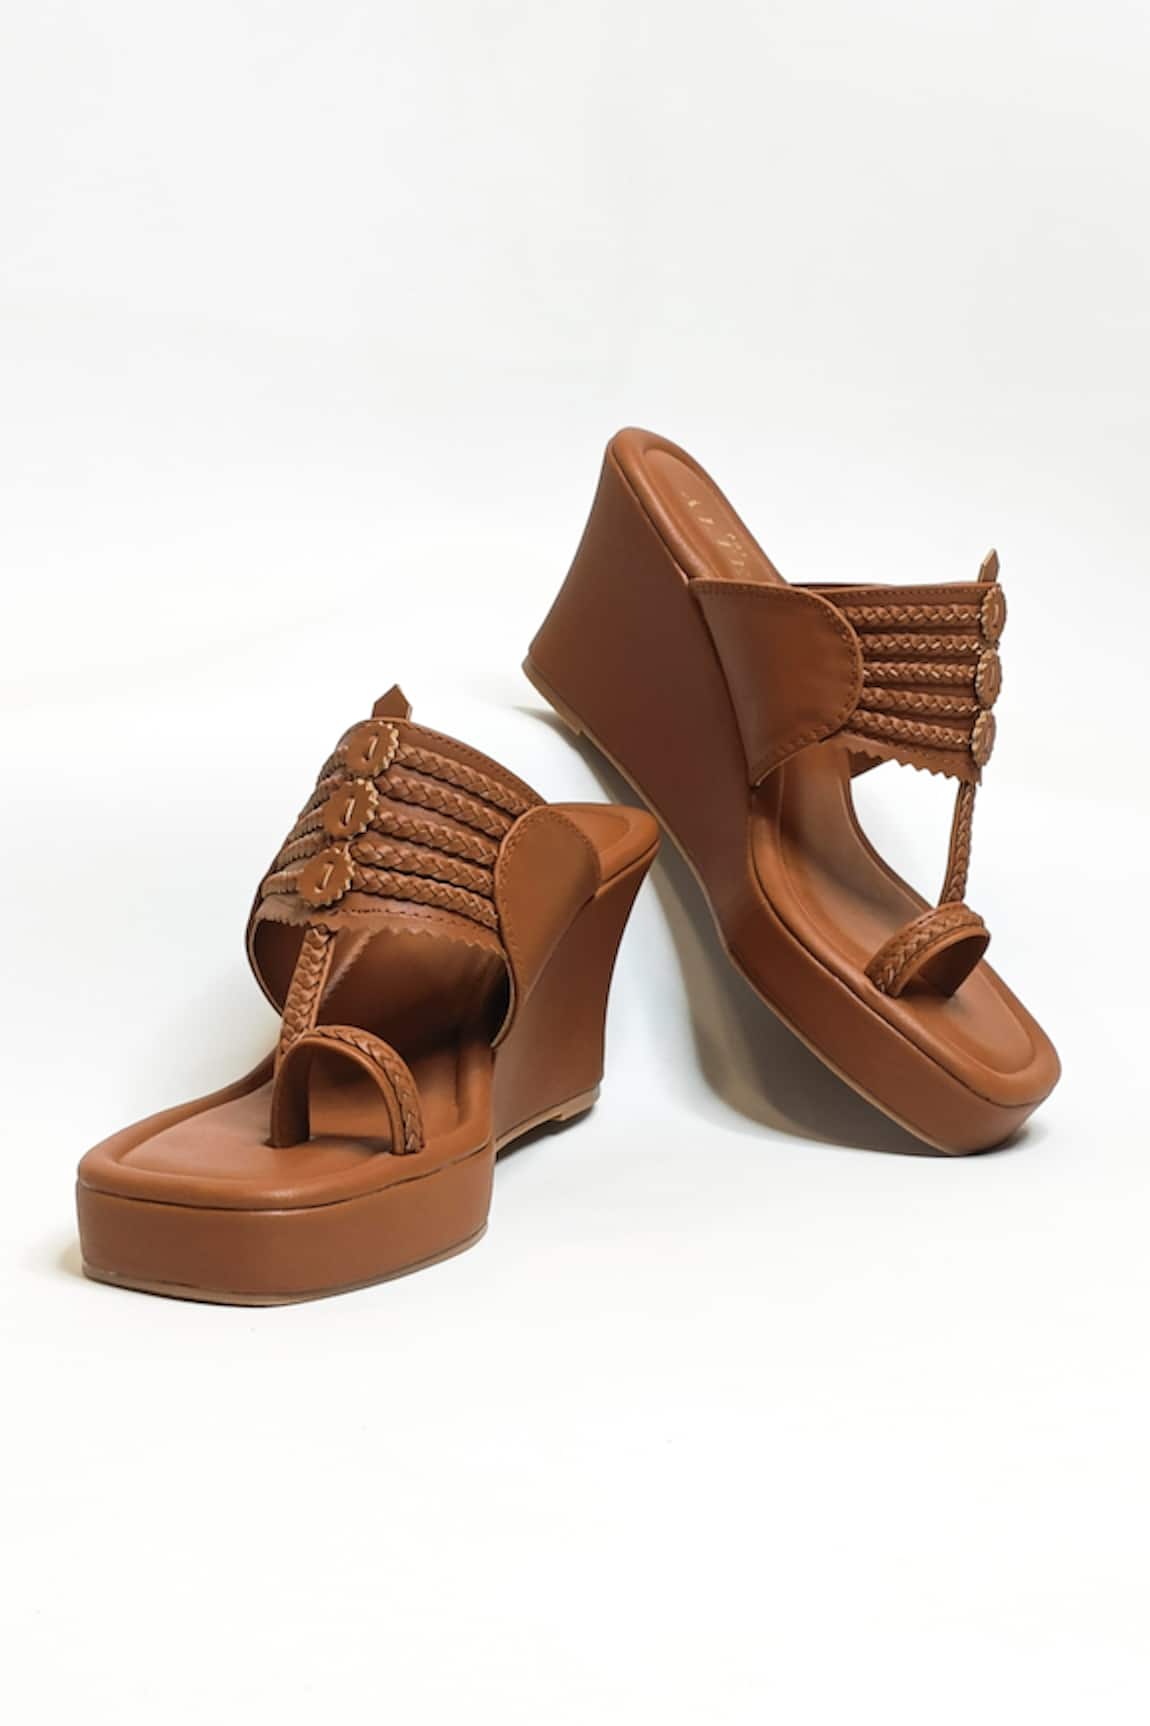 THE ALTER Braided Strapped Kolhapuri Wedges